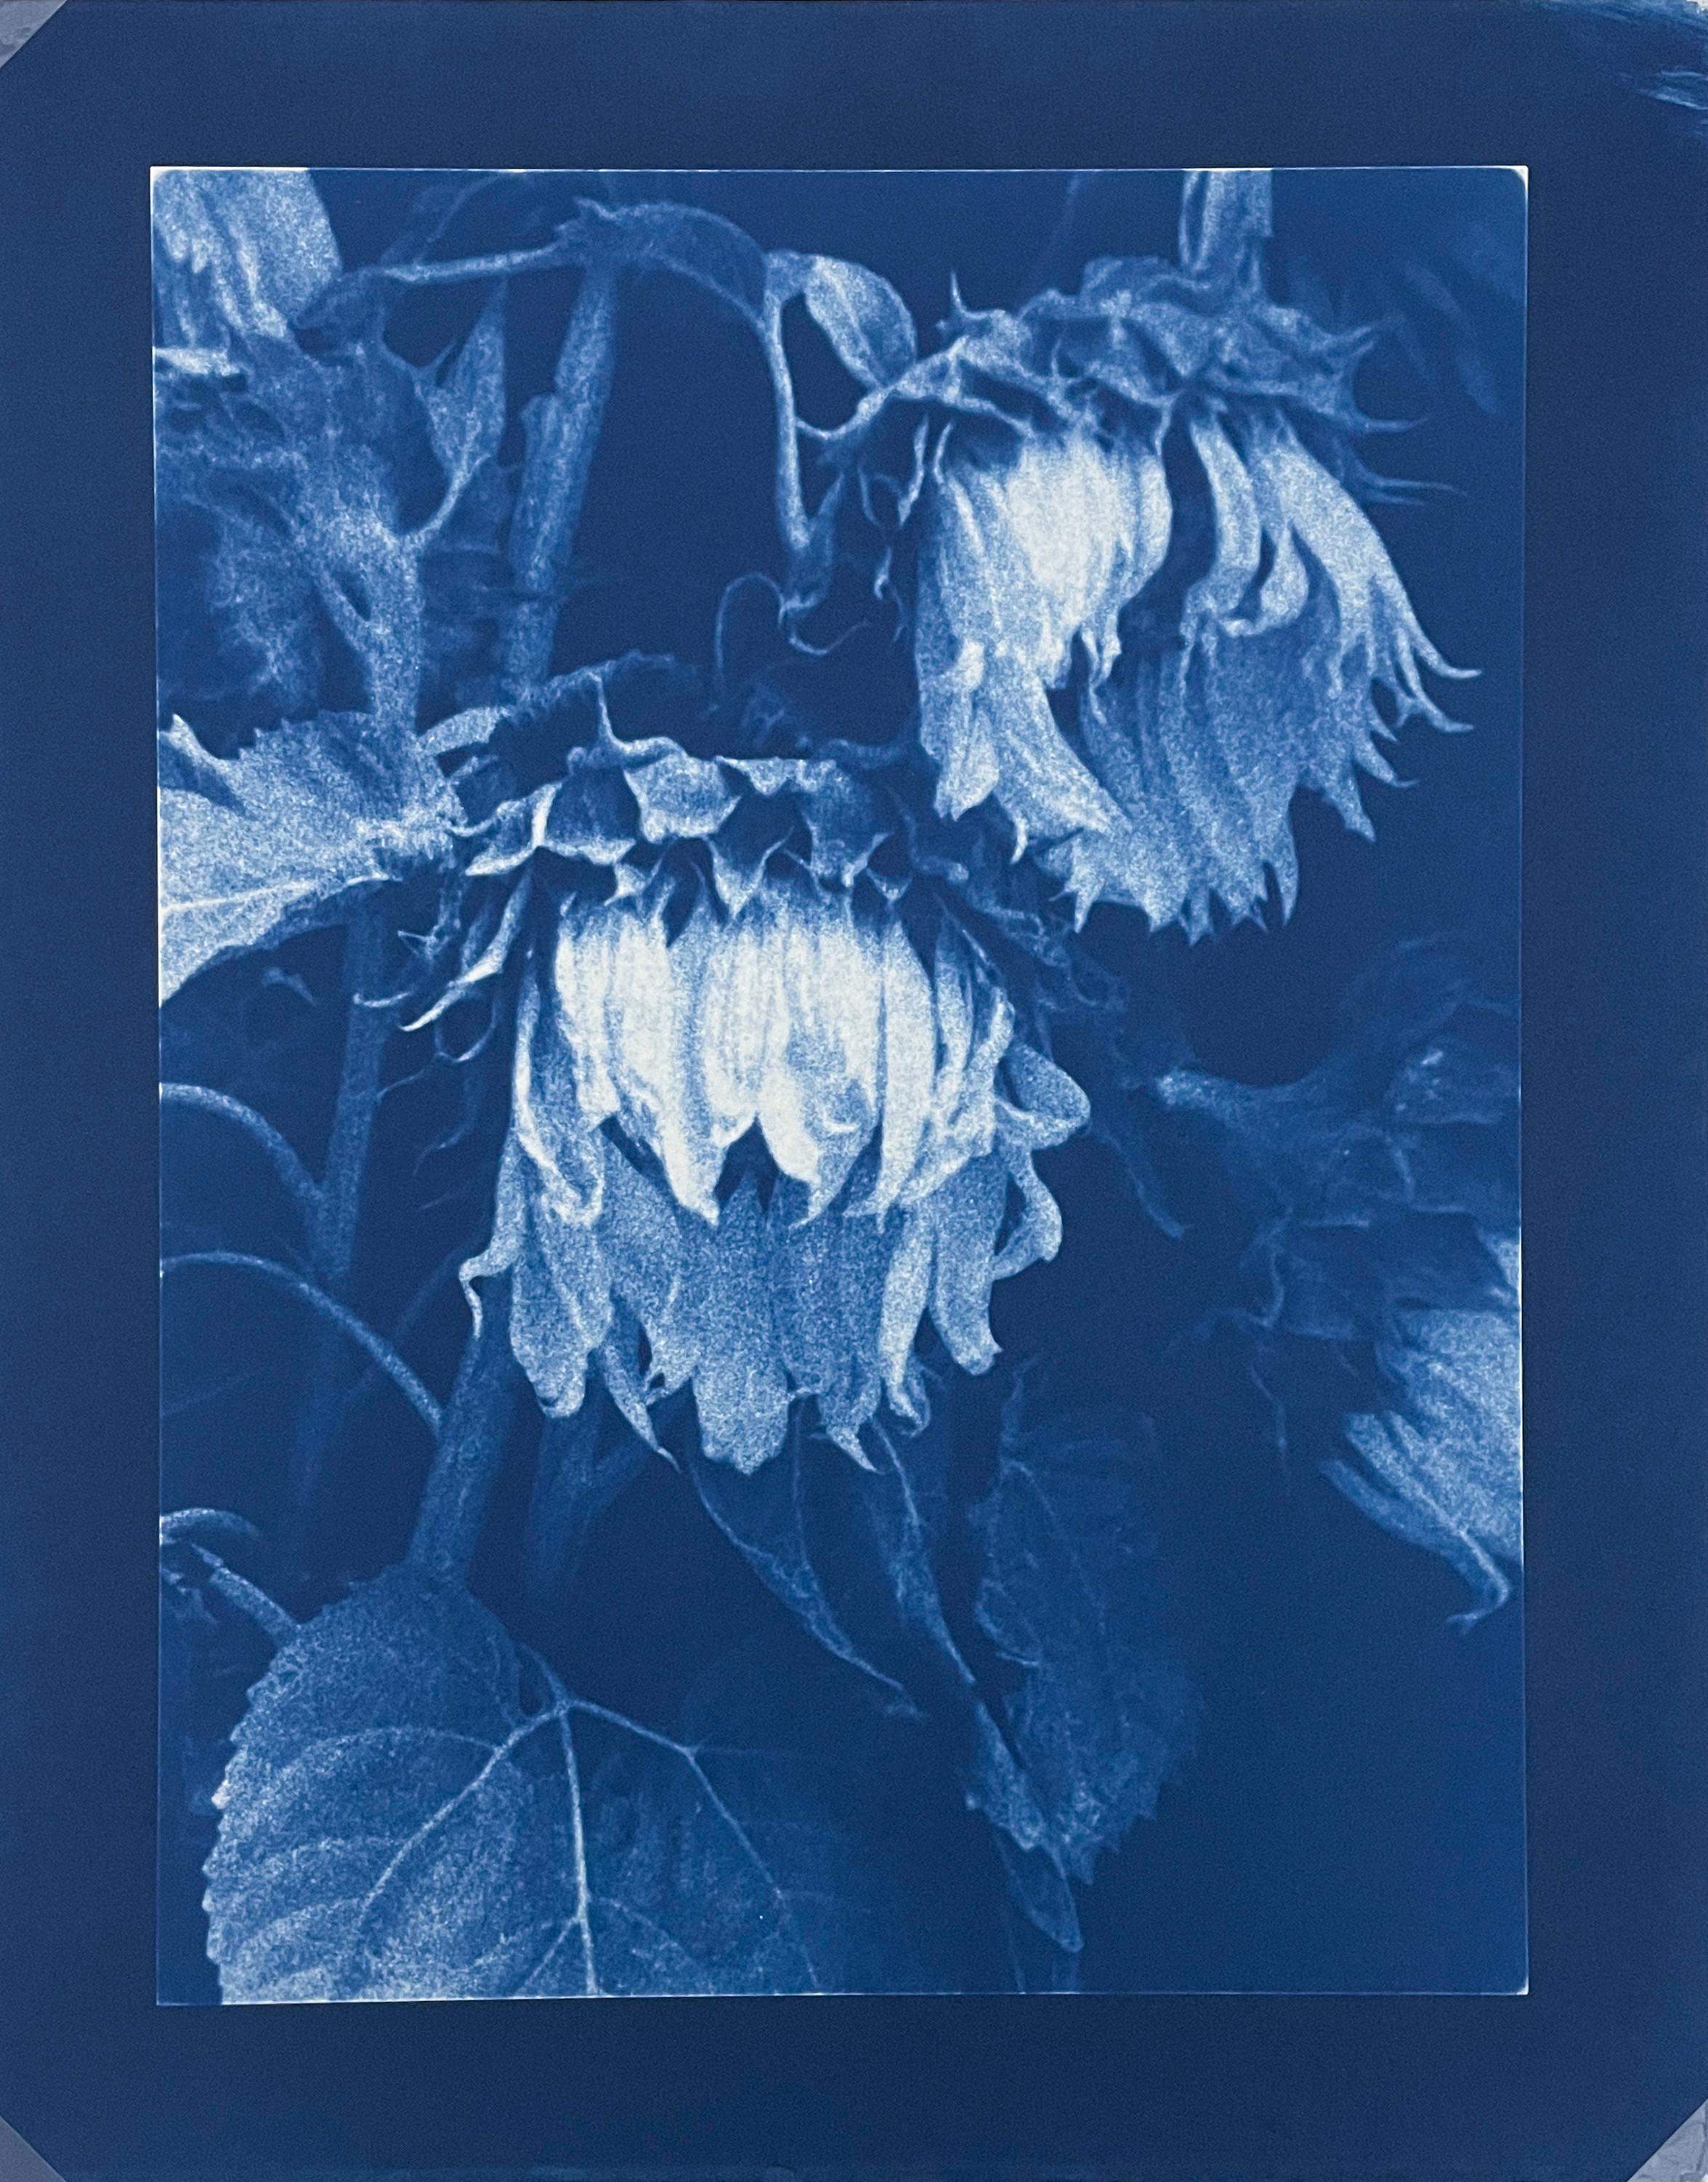 Sunflowers by Jan Van Leeuwen presents two sunflowers, slightly dried and wilted, bathed in a deep saturated blue. 

Sunflowers by Jan Van Leeuwen is a 16 x 12 inch cyanotype print. It is signed and dated with print date, print type, and artist